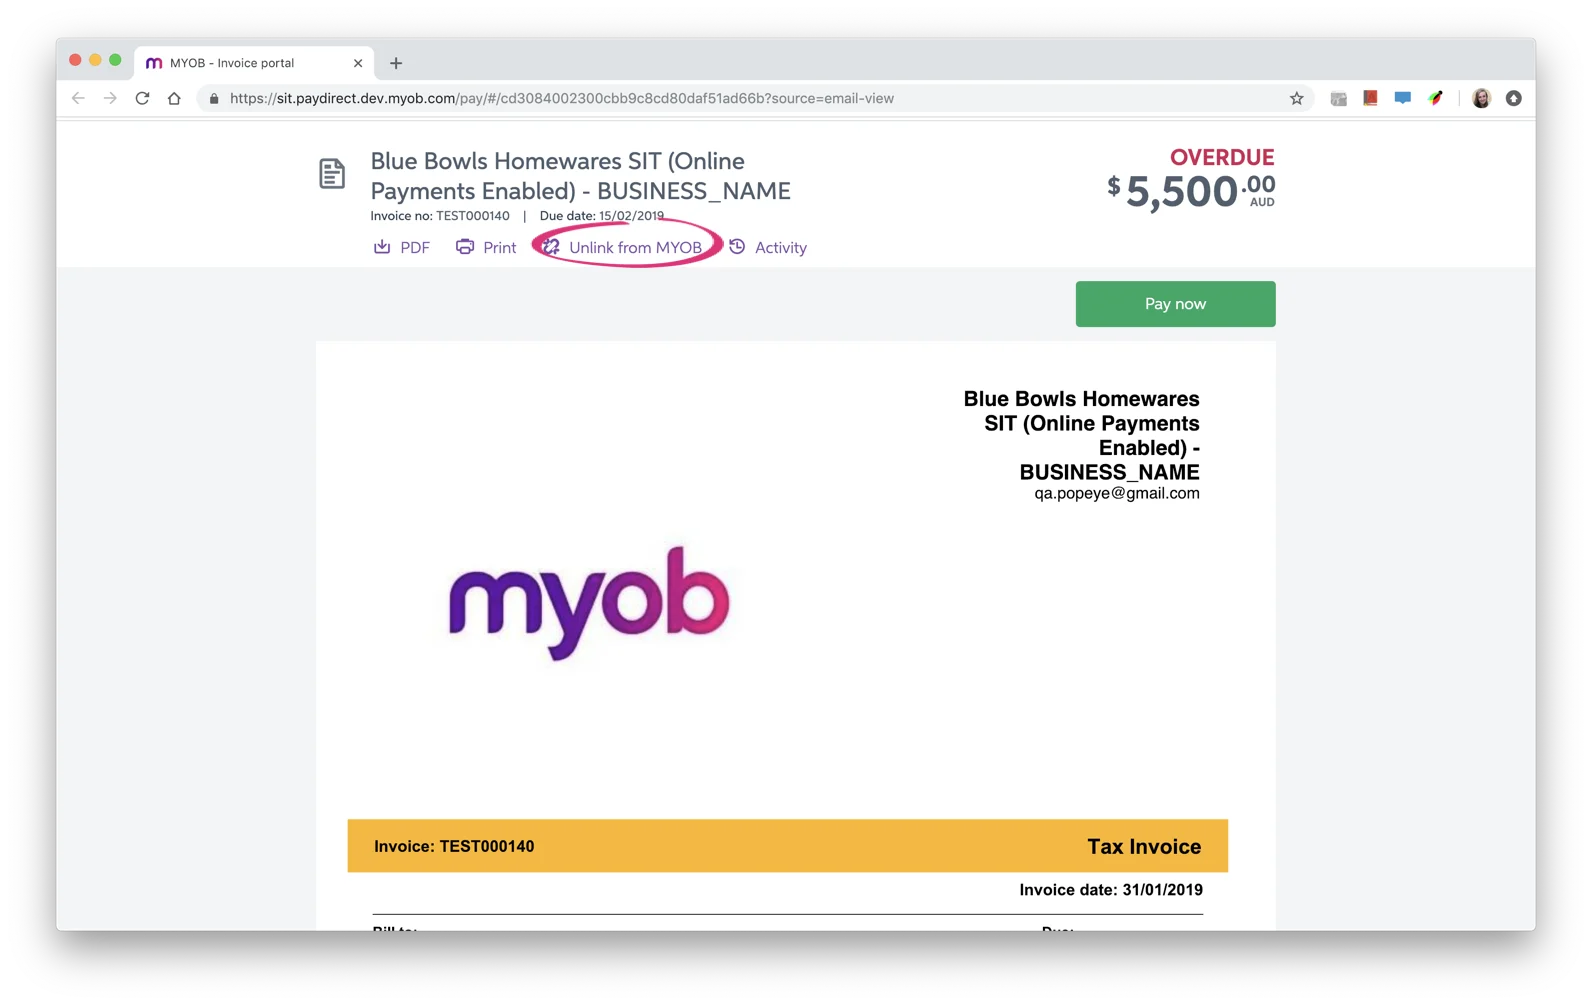 Unlink from MYOB button in an invoice